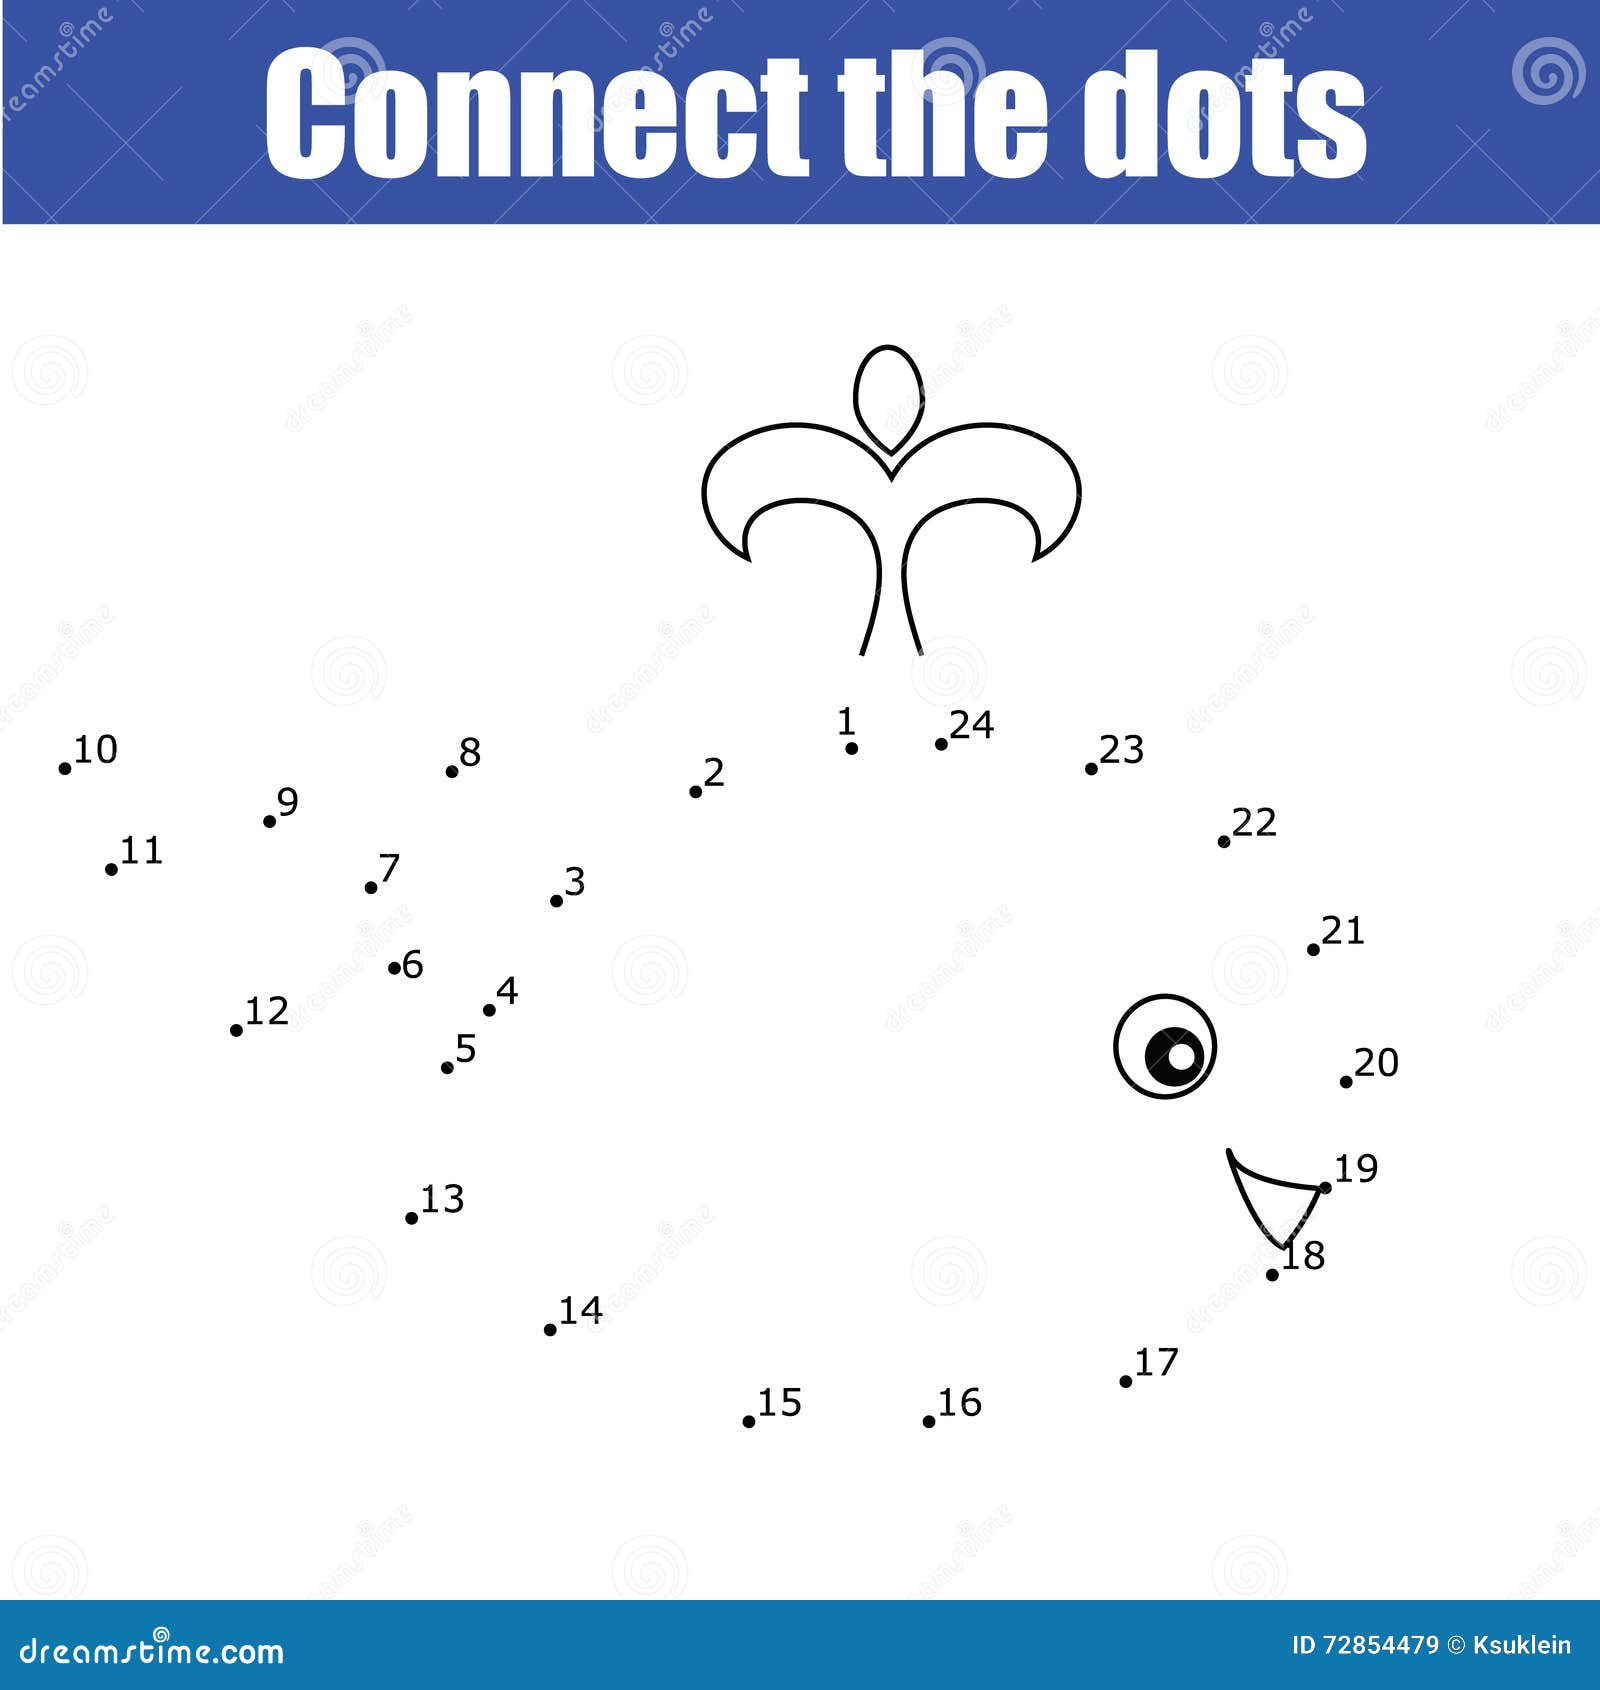 connect-the-dots-by-numbers-educational-children-game-stock-vector